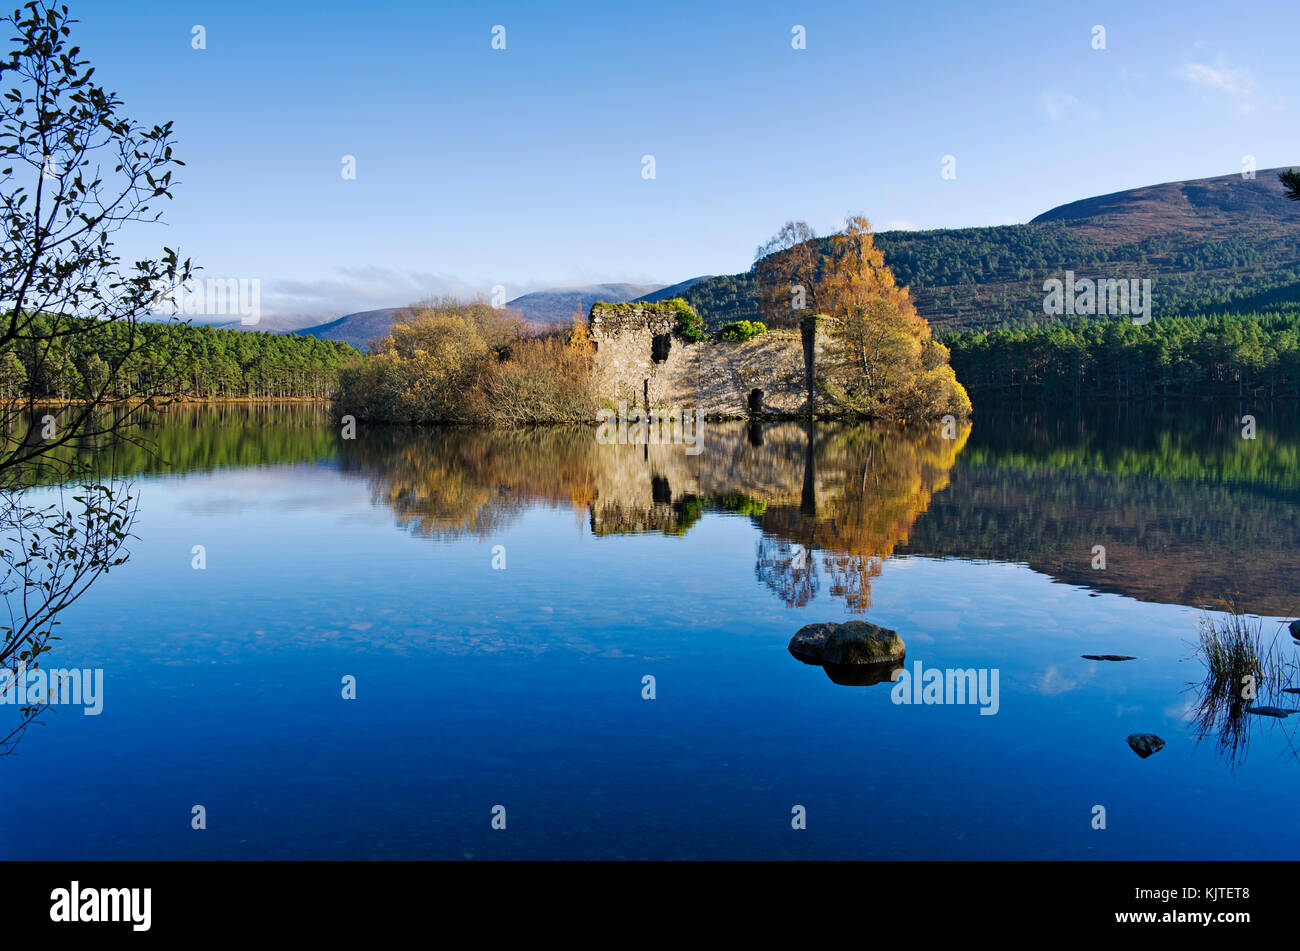 Loch an Eilein, Rothiemurchus, Cairngorms, Scottish Highlands, UK. The old ruined island castle reflected in the loch on a beautiful calm autumn day. Stock Photo